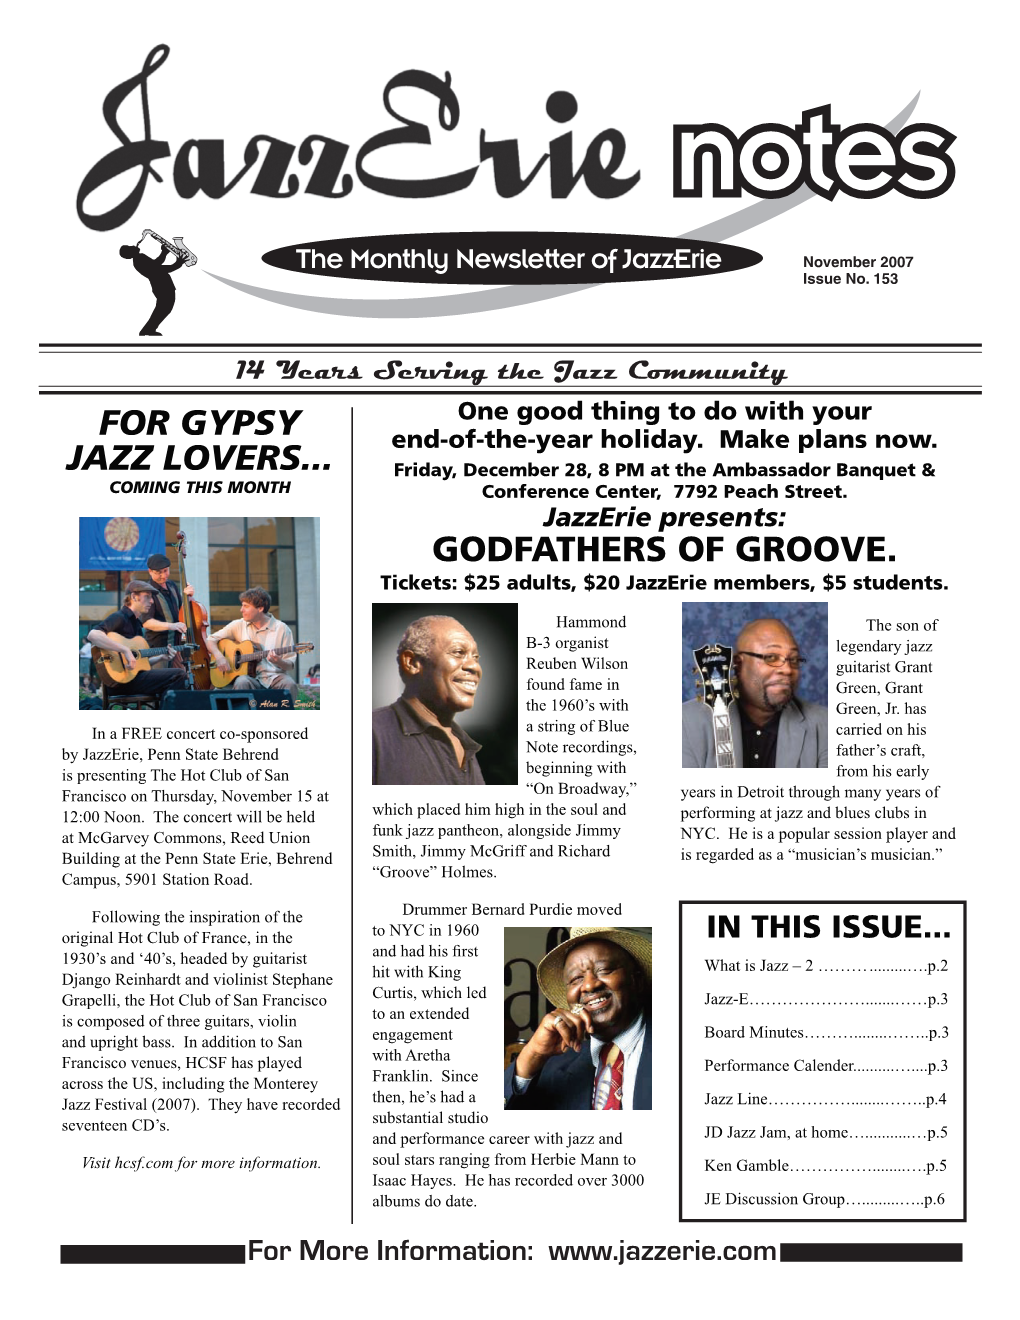 For Gypsy Jazz Lovers... Godfathers of Groove